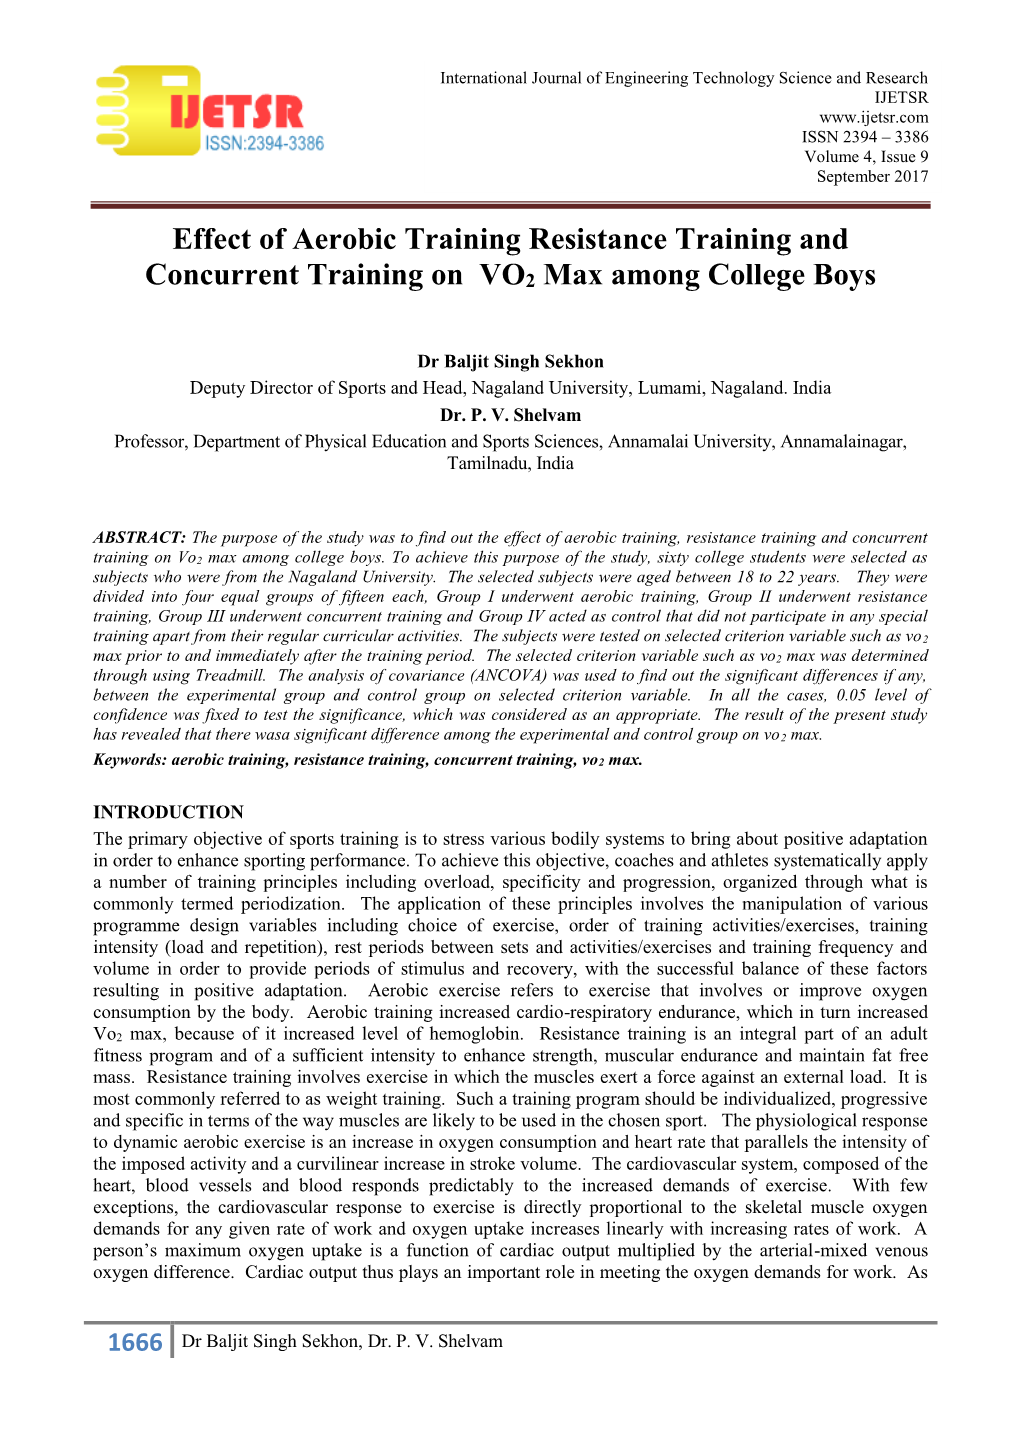 Effect of Aerobic Training Resistance Training and Concurrent Training on VO2 Max Among College Boys